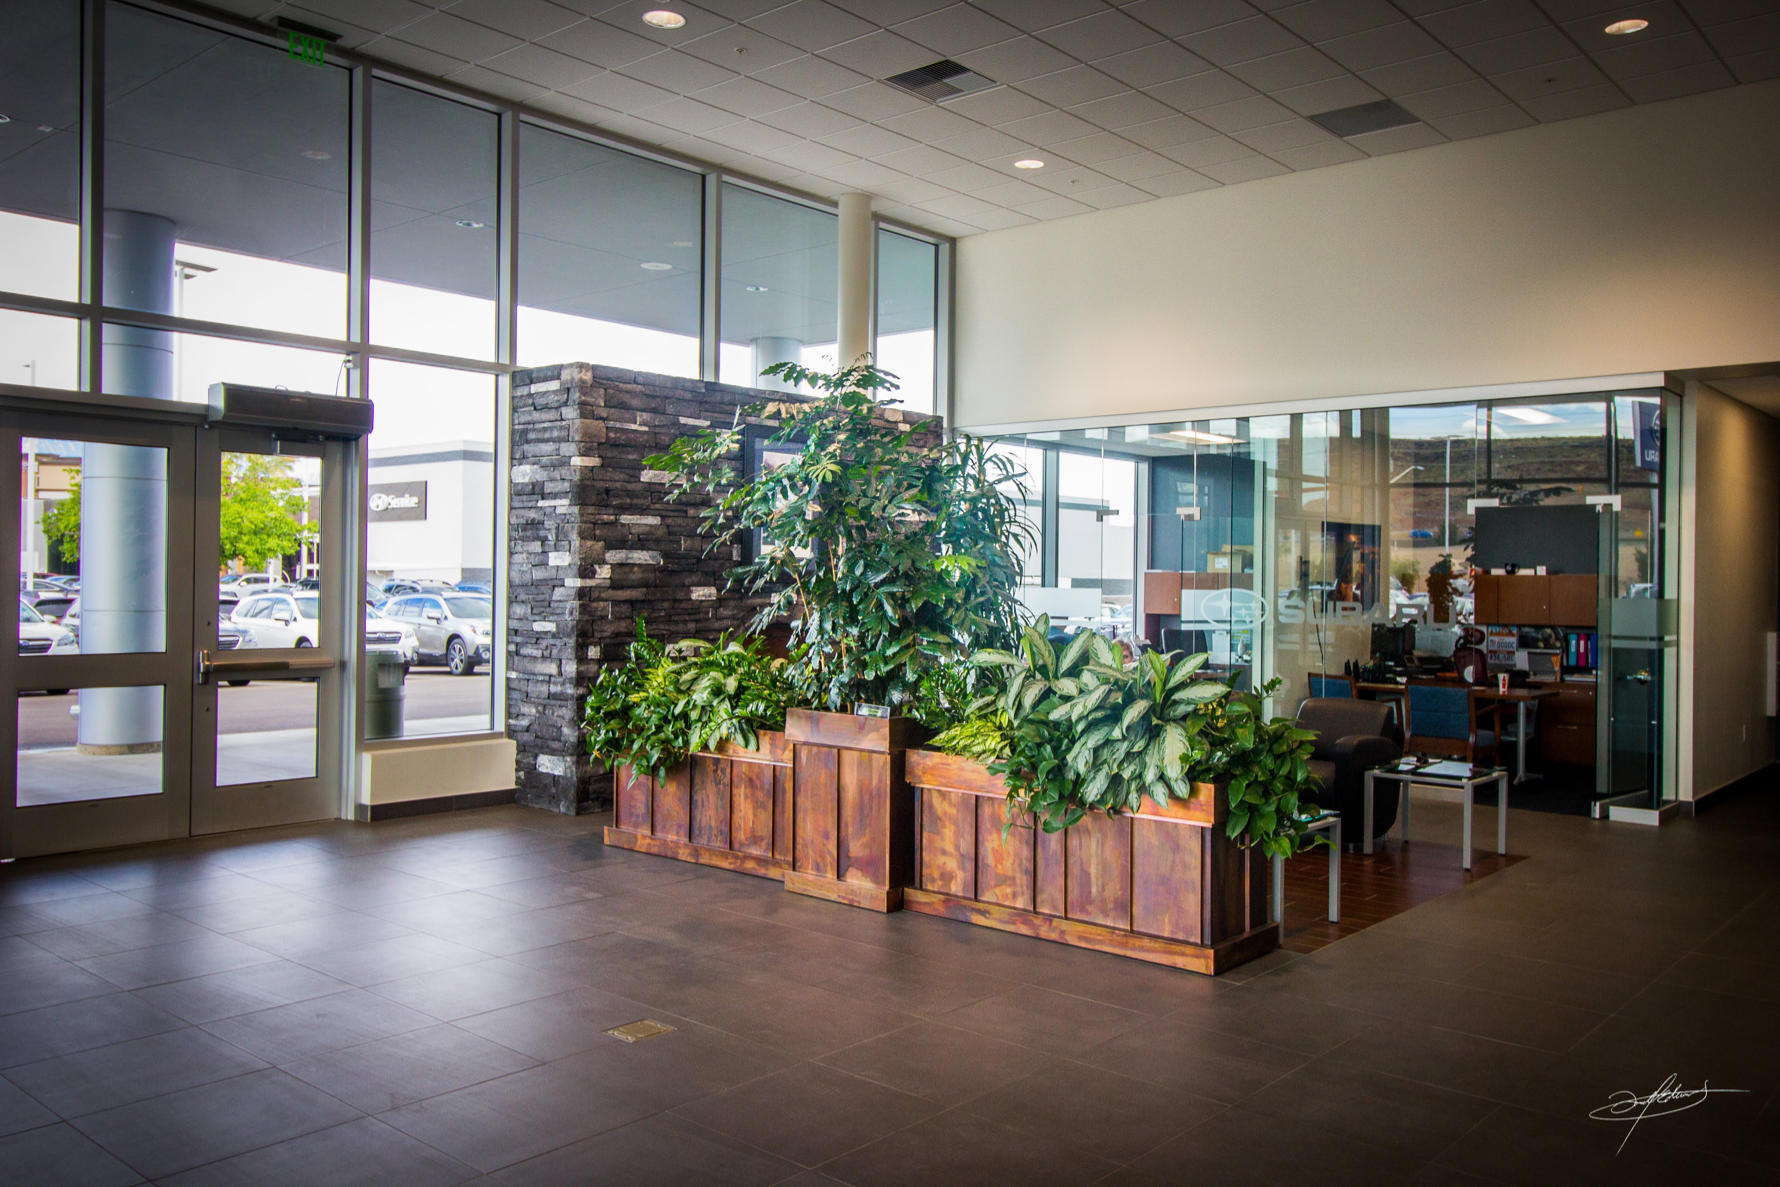 large bronze planters full of vibrant subtropical plants in a car dealership lobby